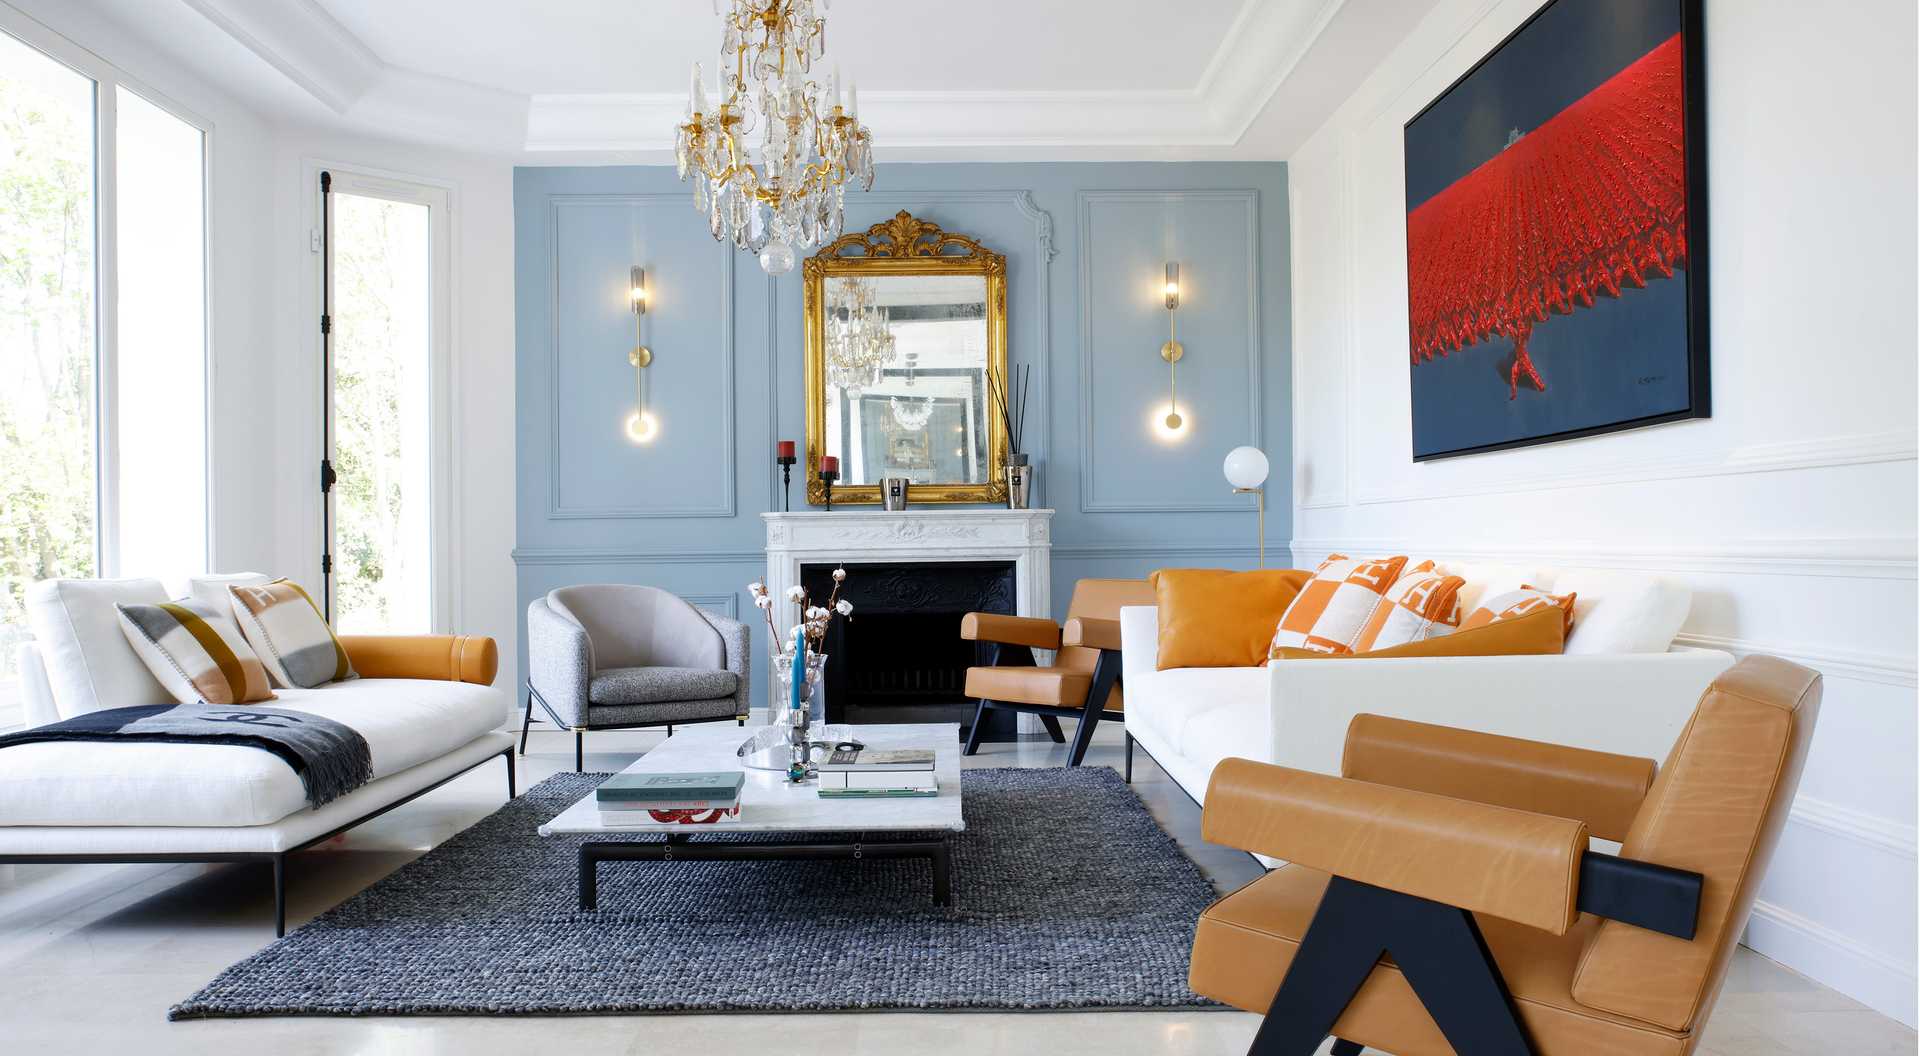 Interior makeover of an apartment by an interior designer in Biarritz